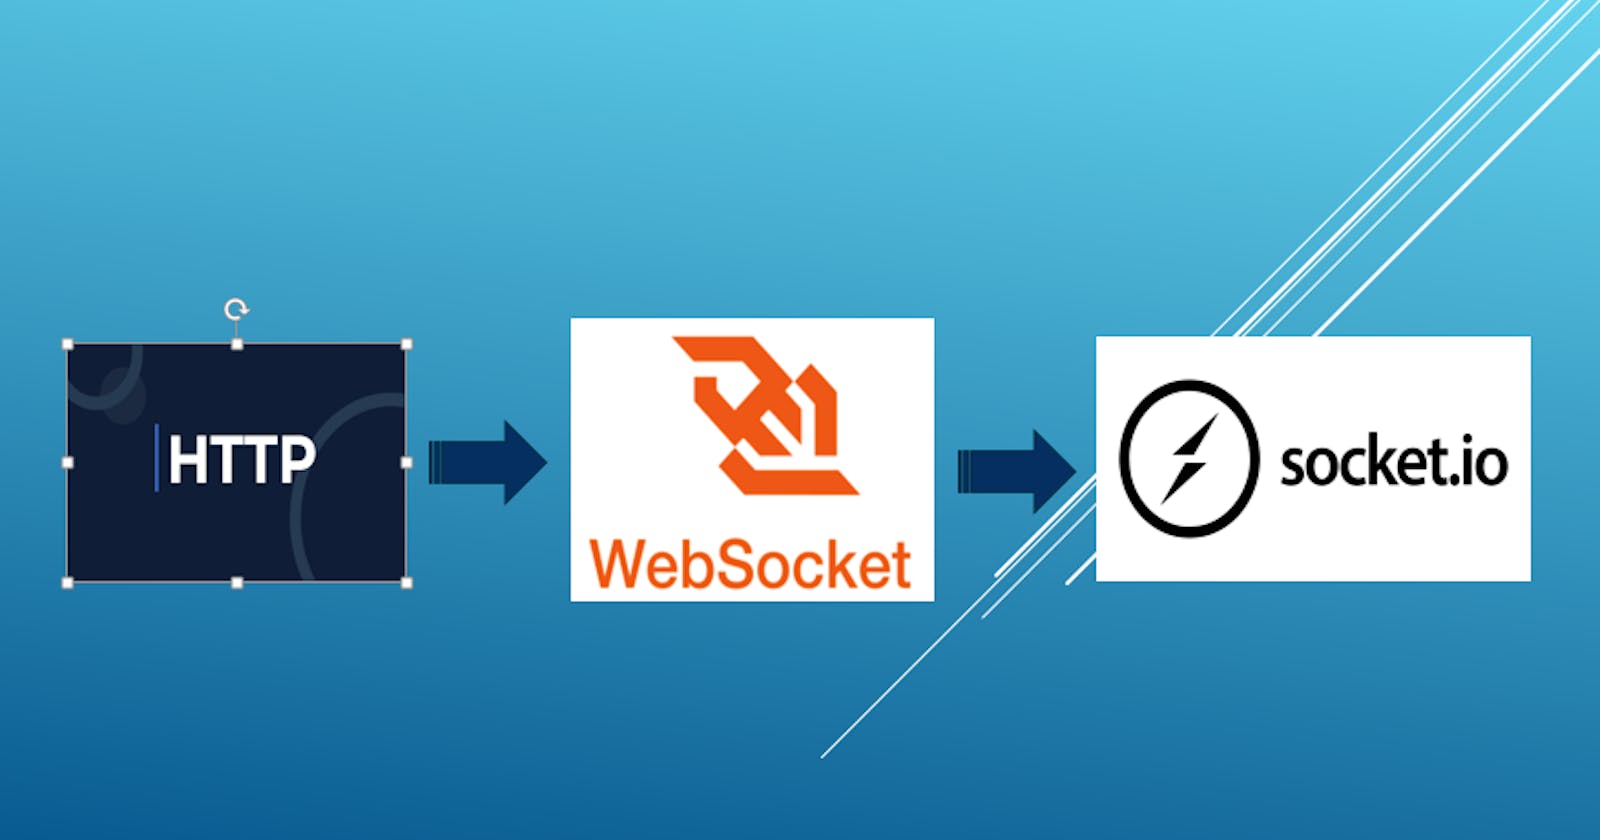 Origin of Websocket, socket.io with practical implementation cases and challenges